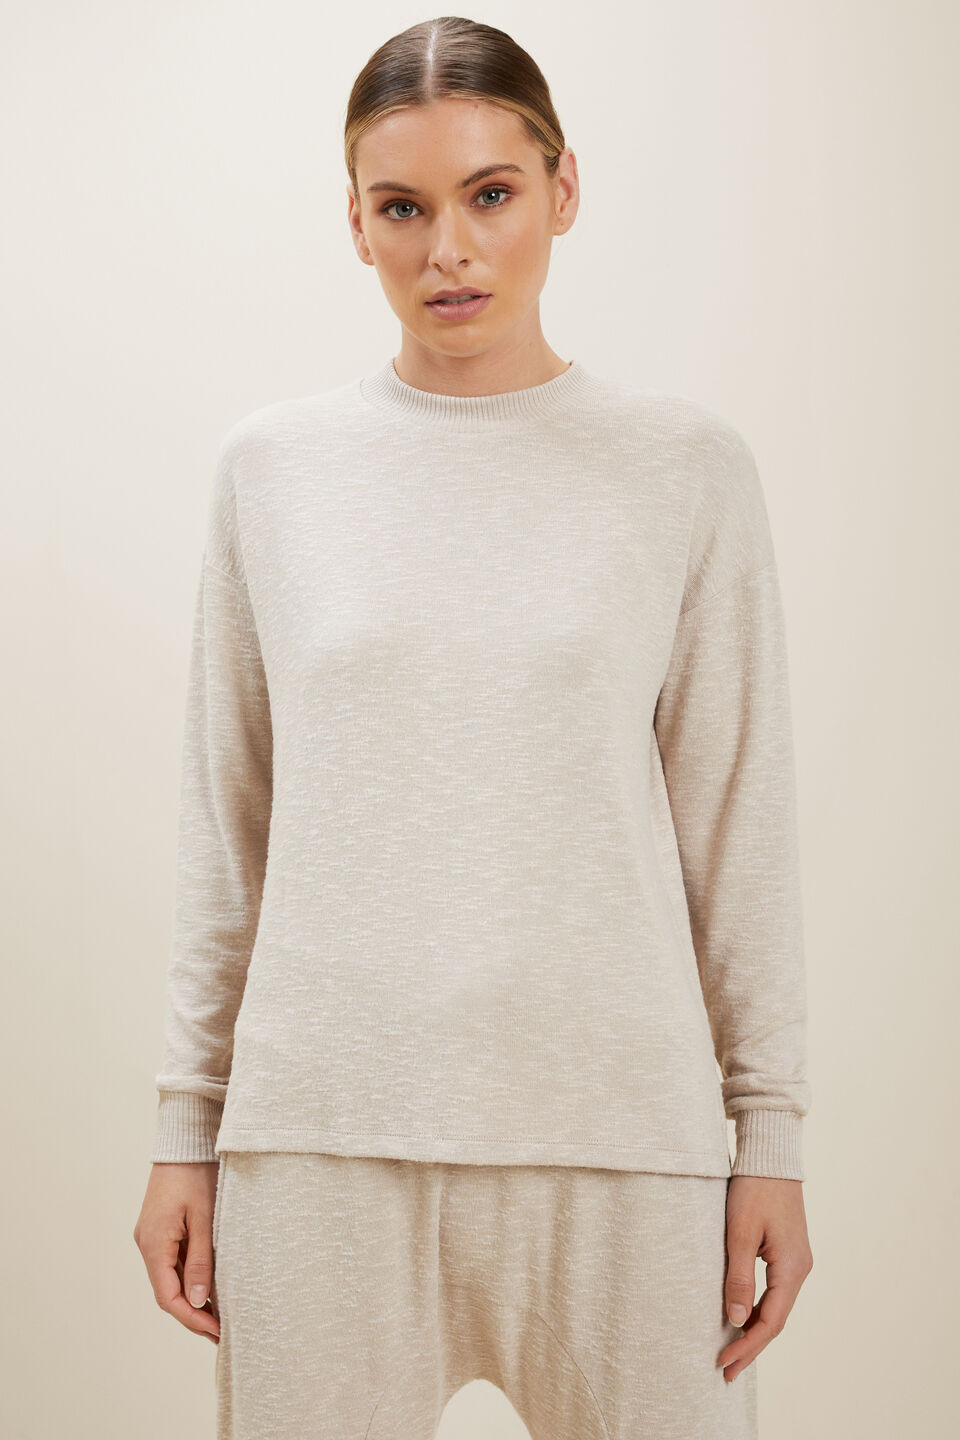 Supersoft Long Sleeve Top  Neutral Blush Marle